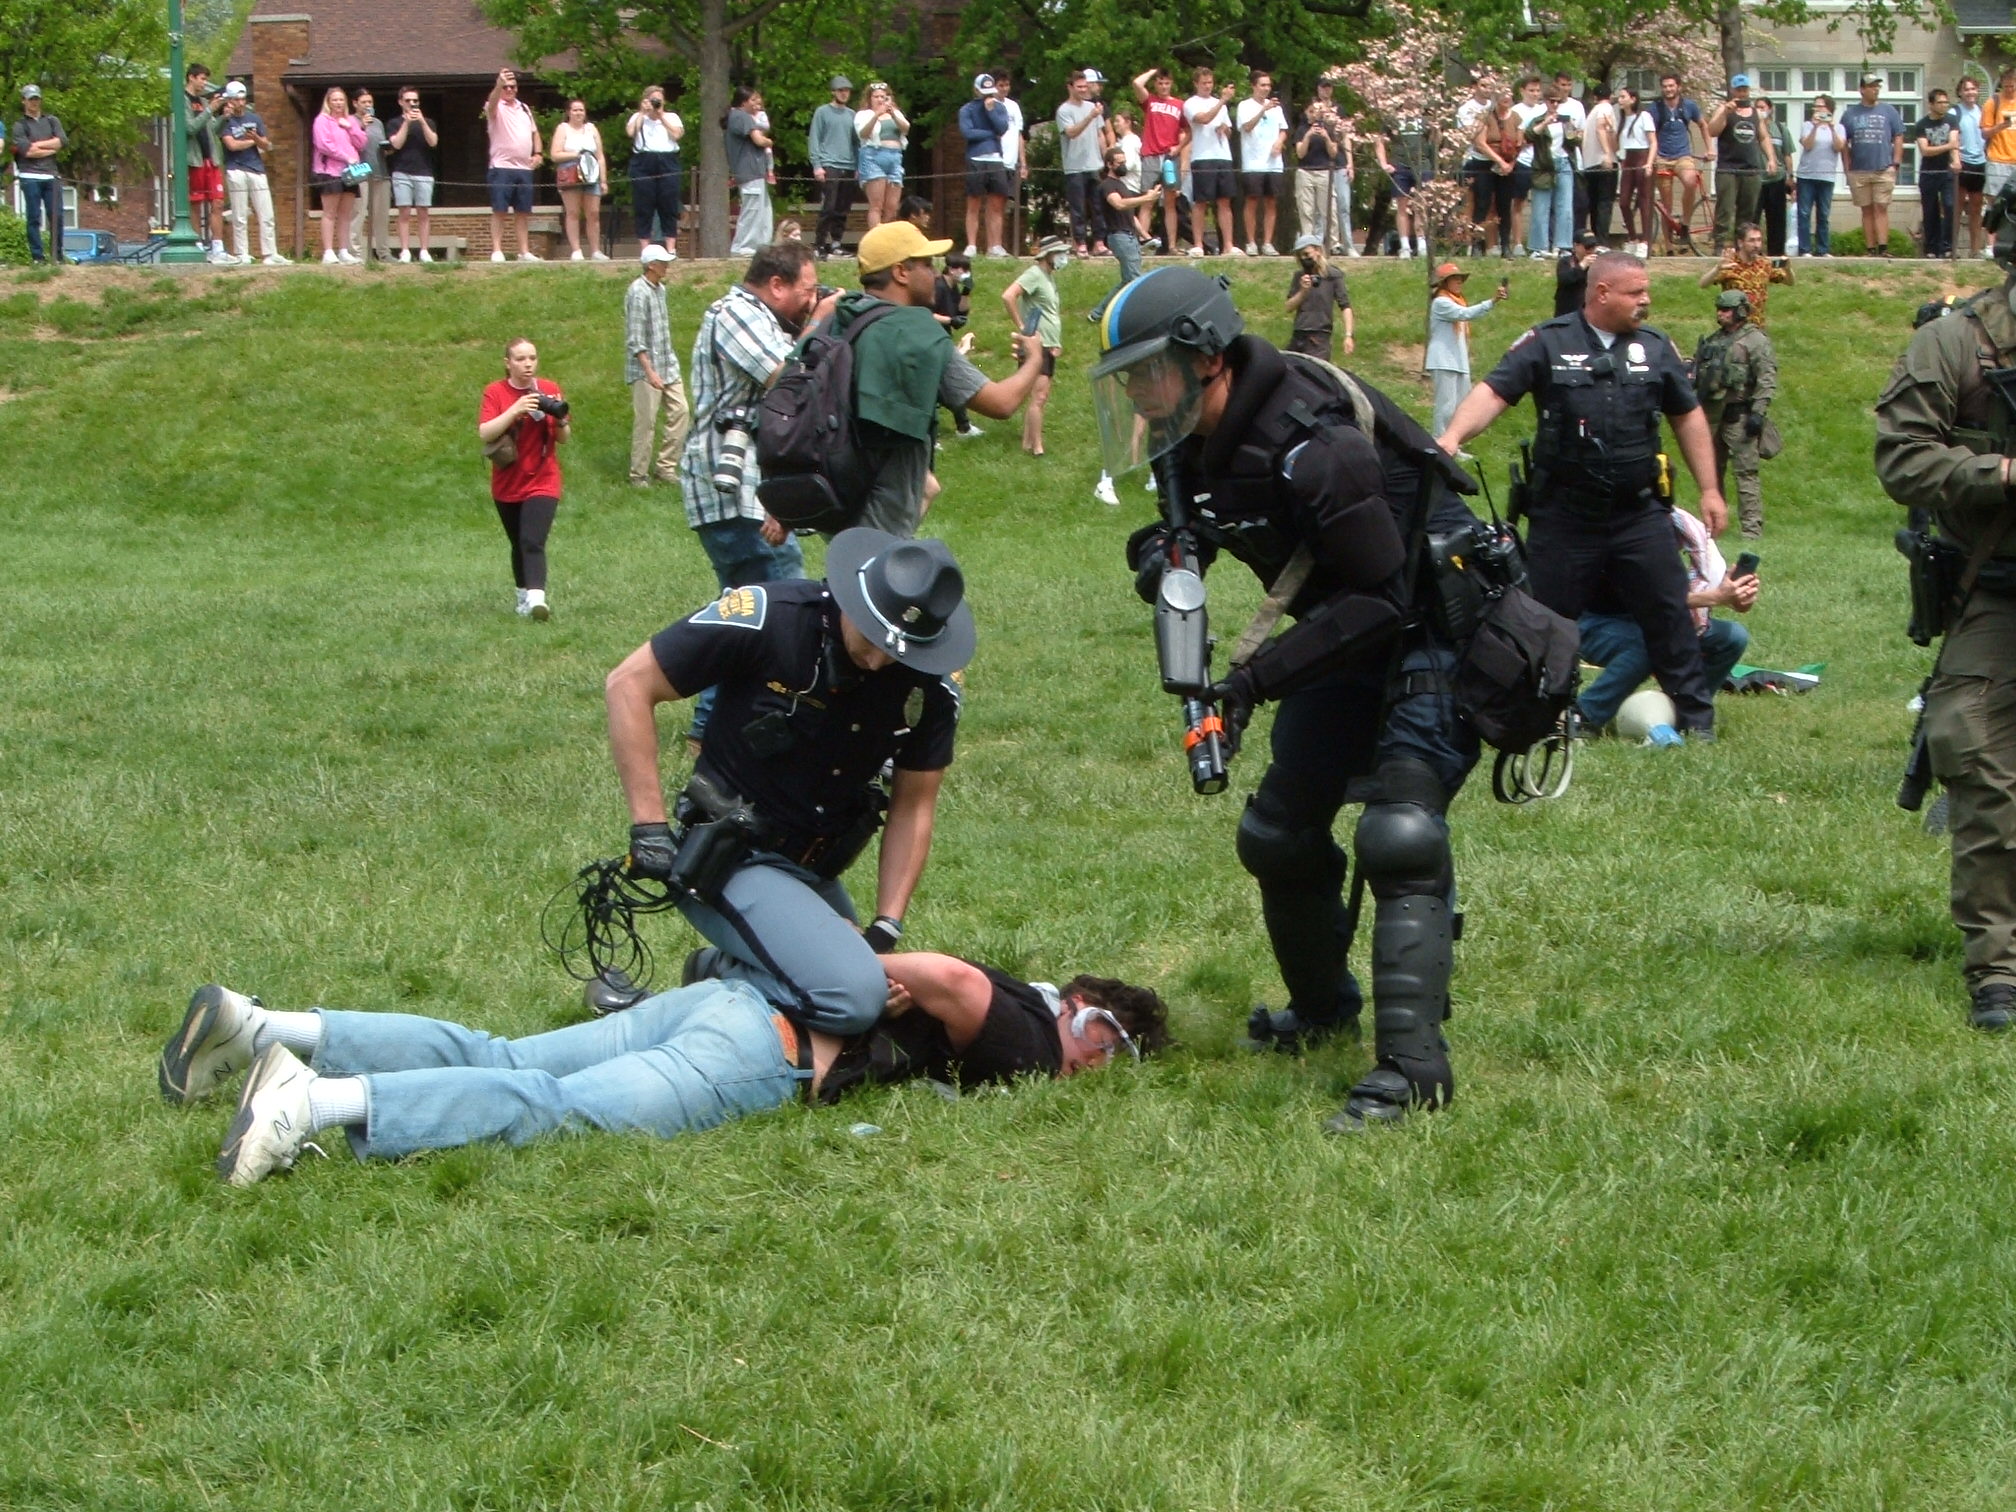 A policeman in riot gear stands over a protestor lying facedown in the grass, handcuffed. The policeman aims his gun loaded with rubber bullets near the protestor. Another officer sits on them restraining them.